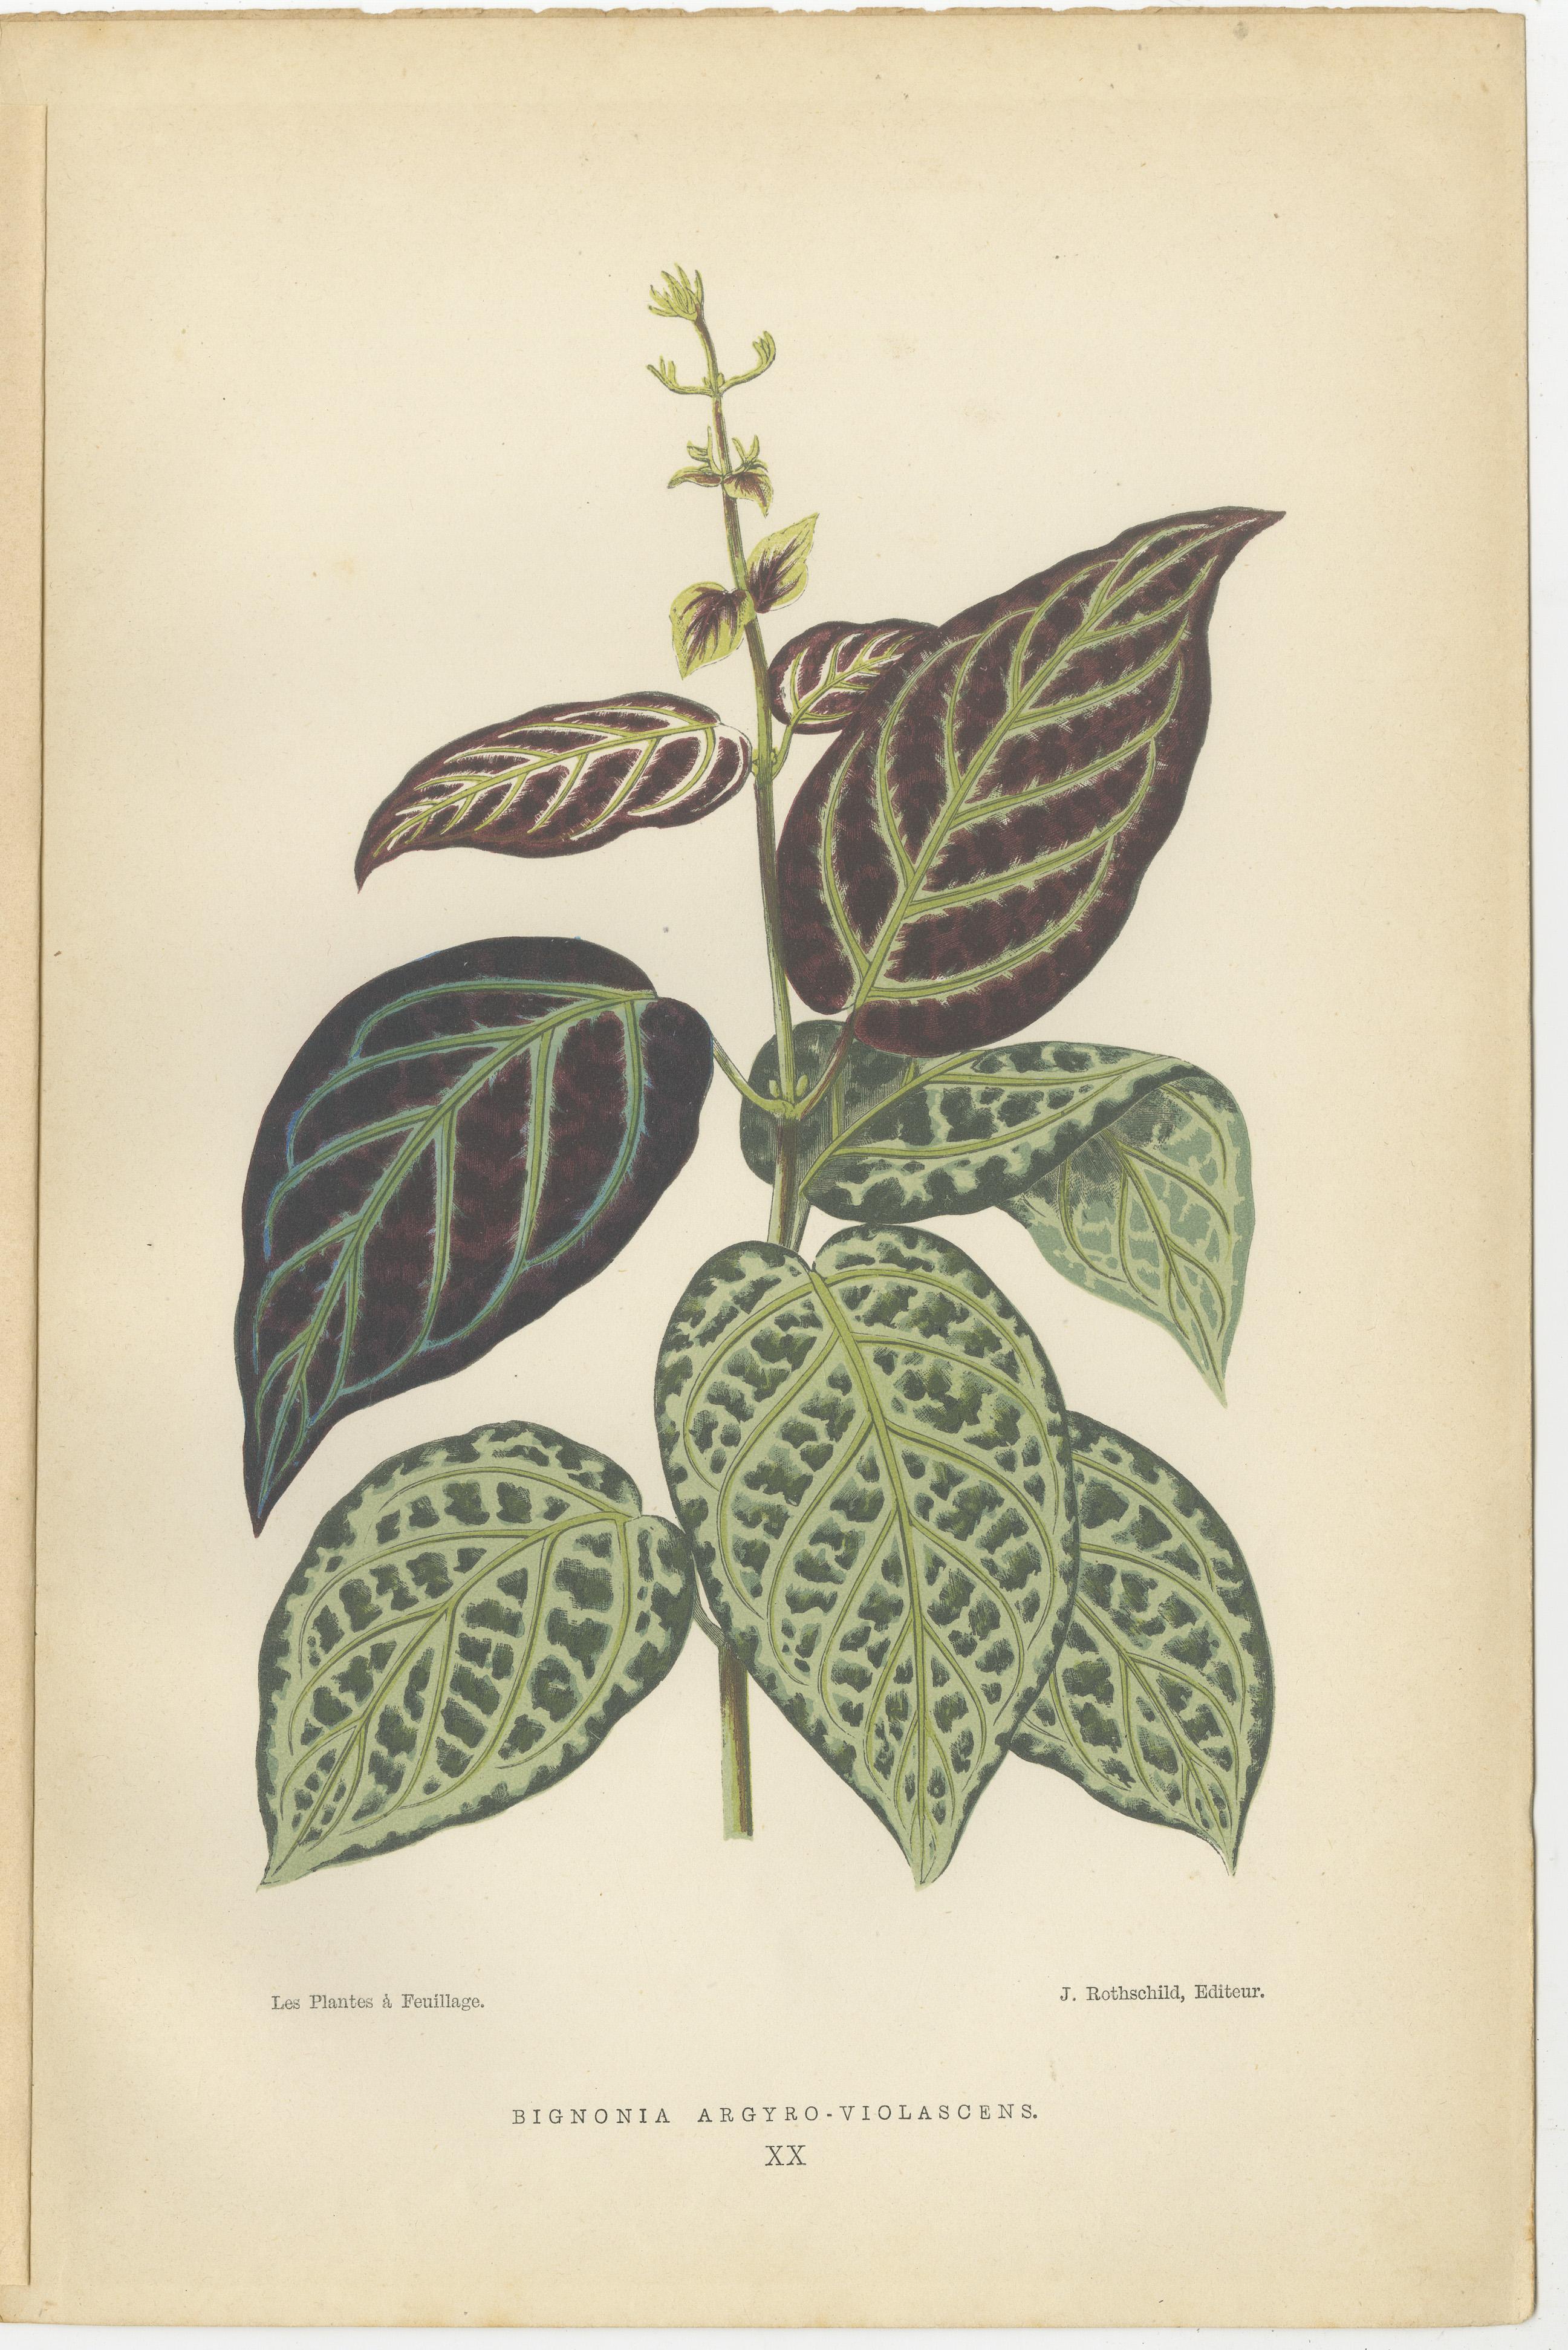 These images are botanical prints from 